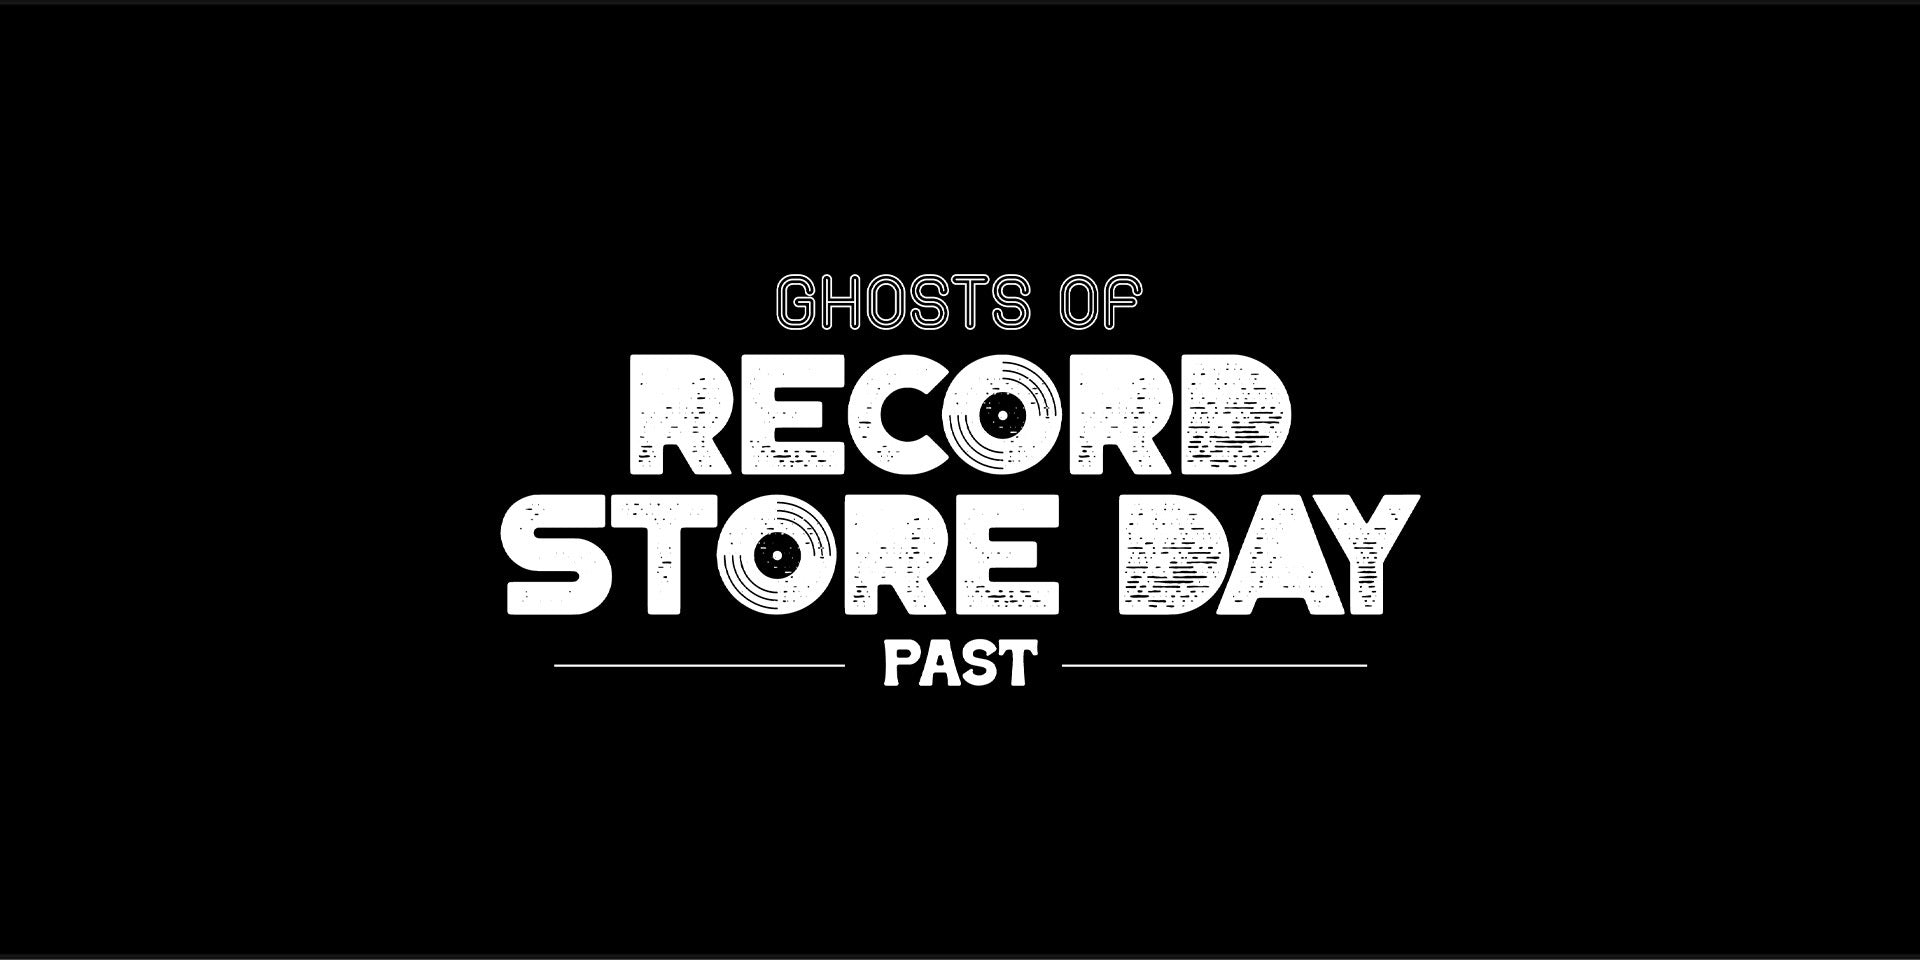 Ghosts of Record Store Day Past